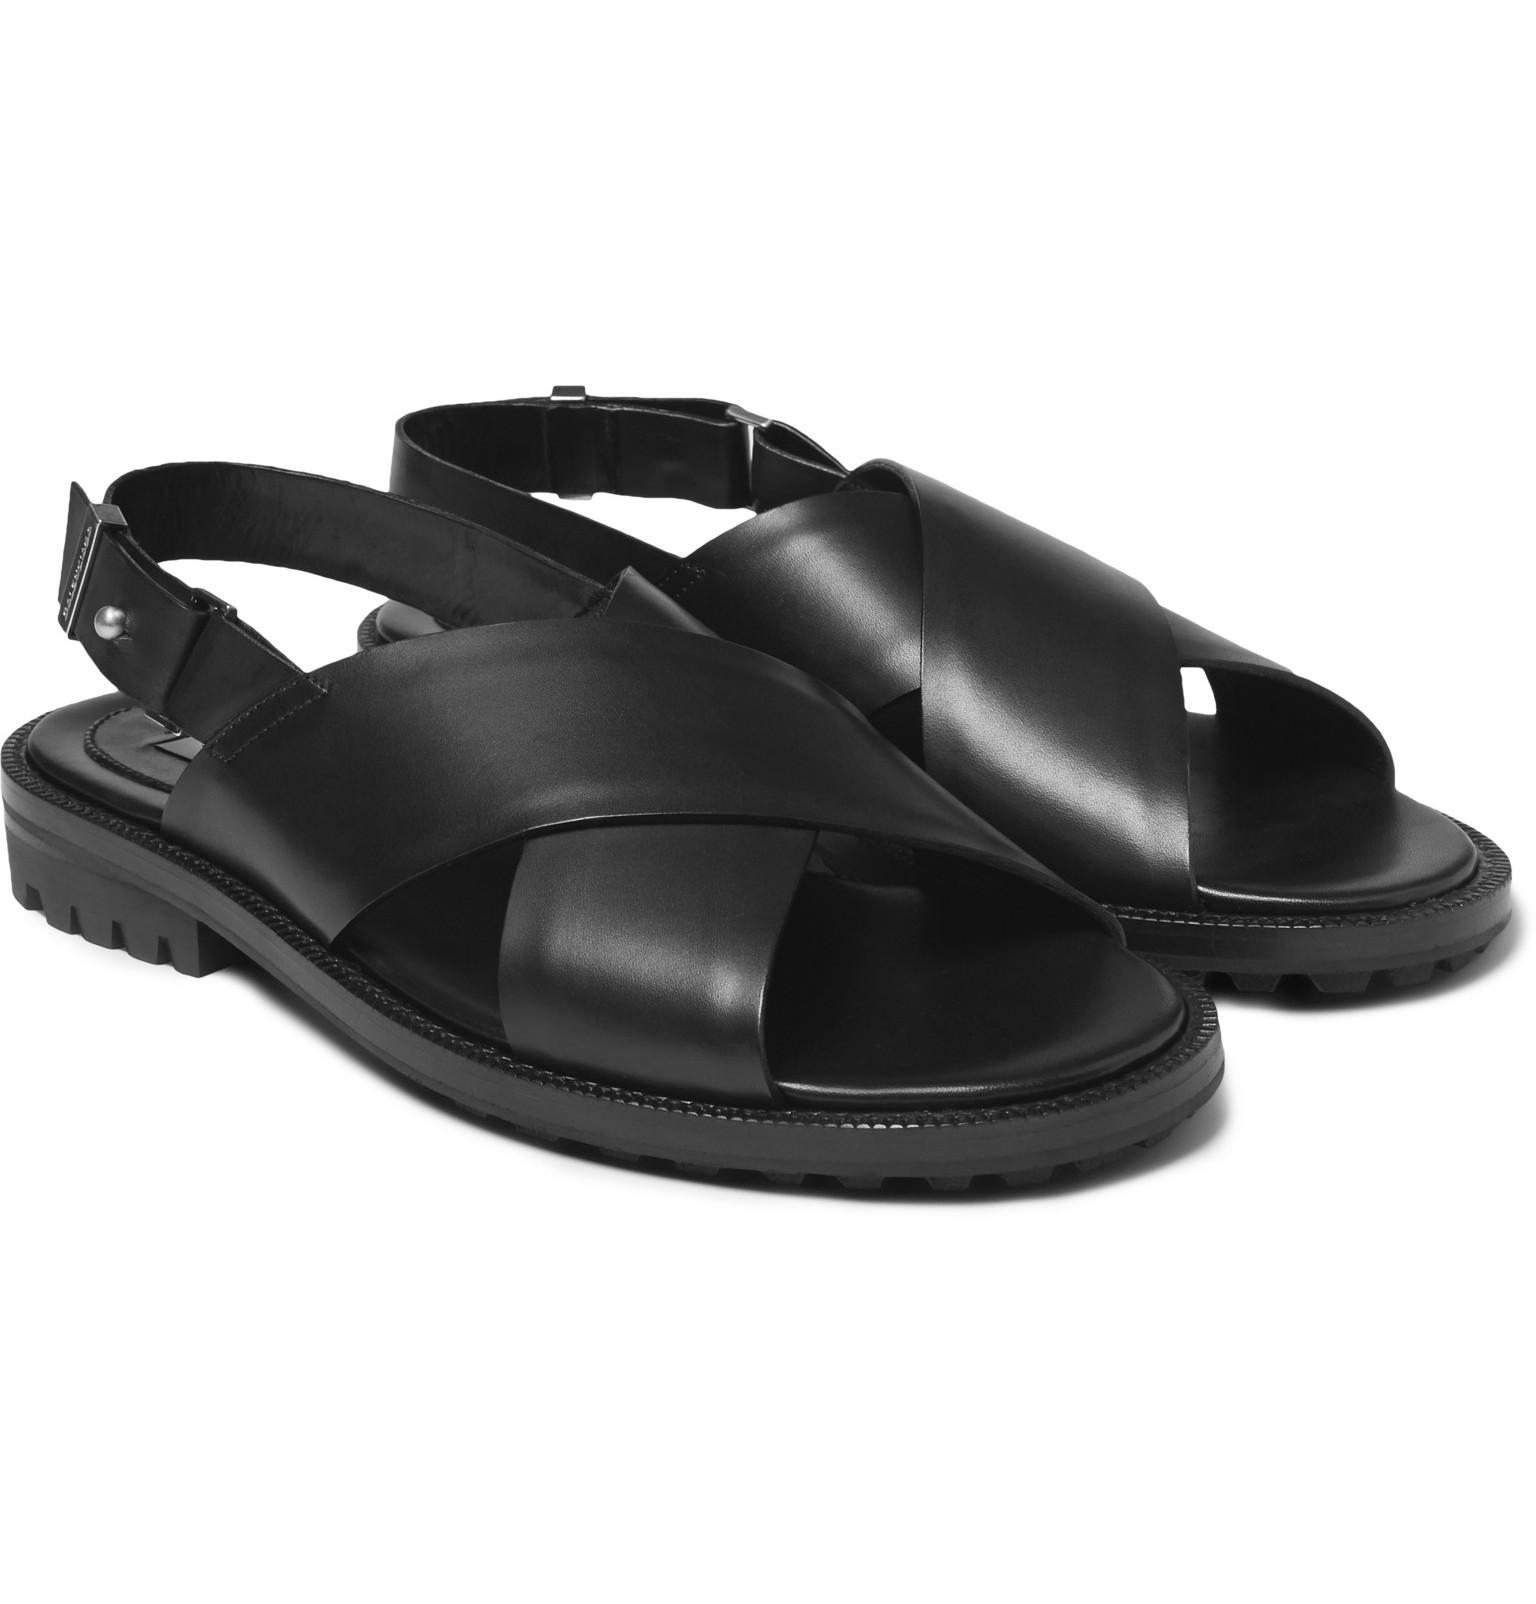 Lyst - Balenciaga Leather Sandals in Black for Men